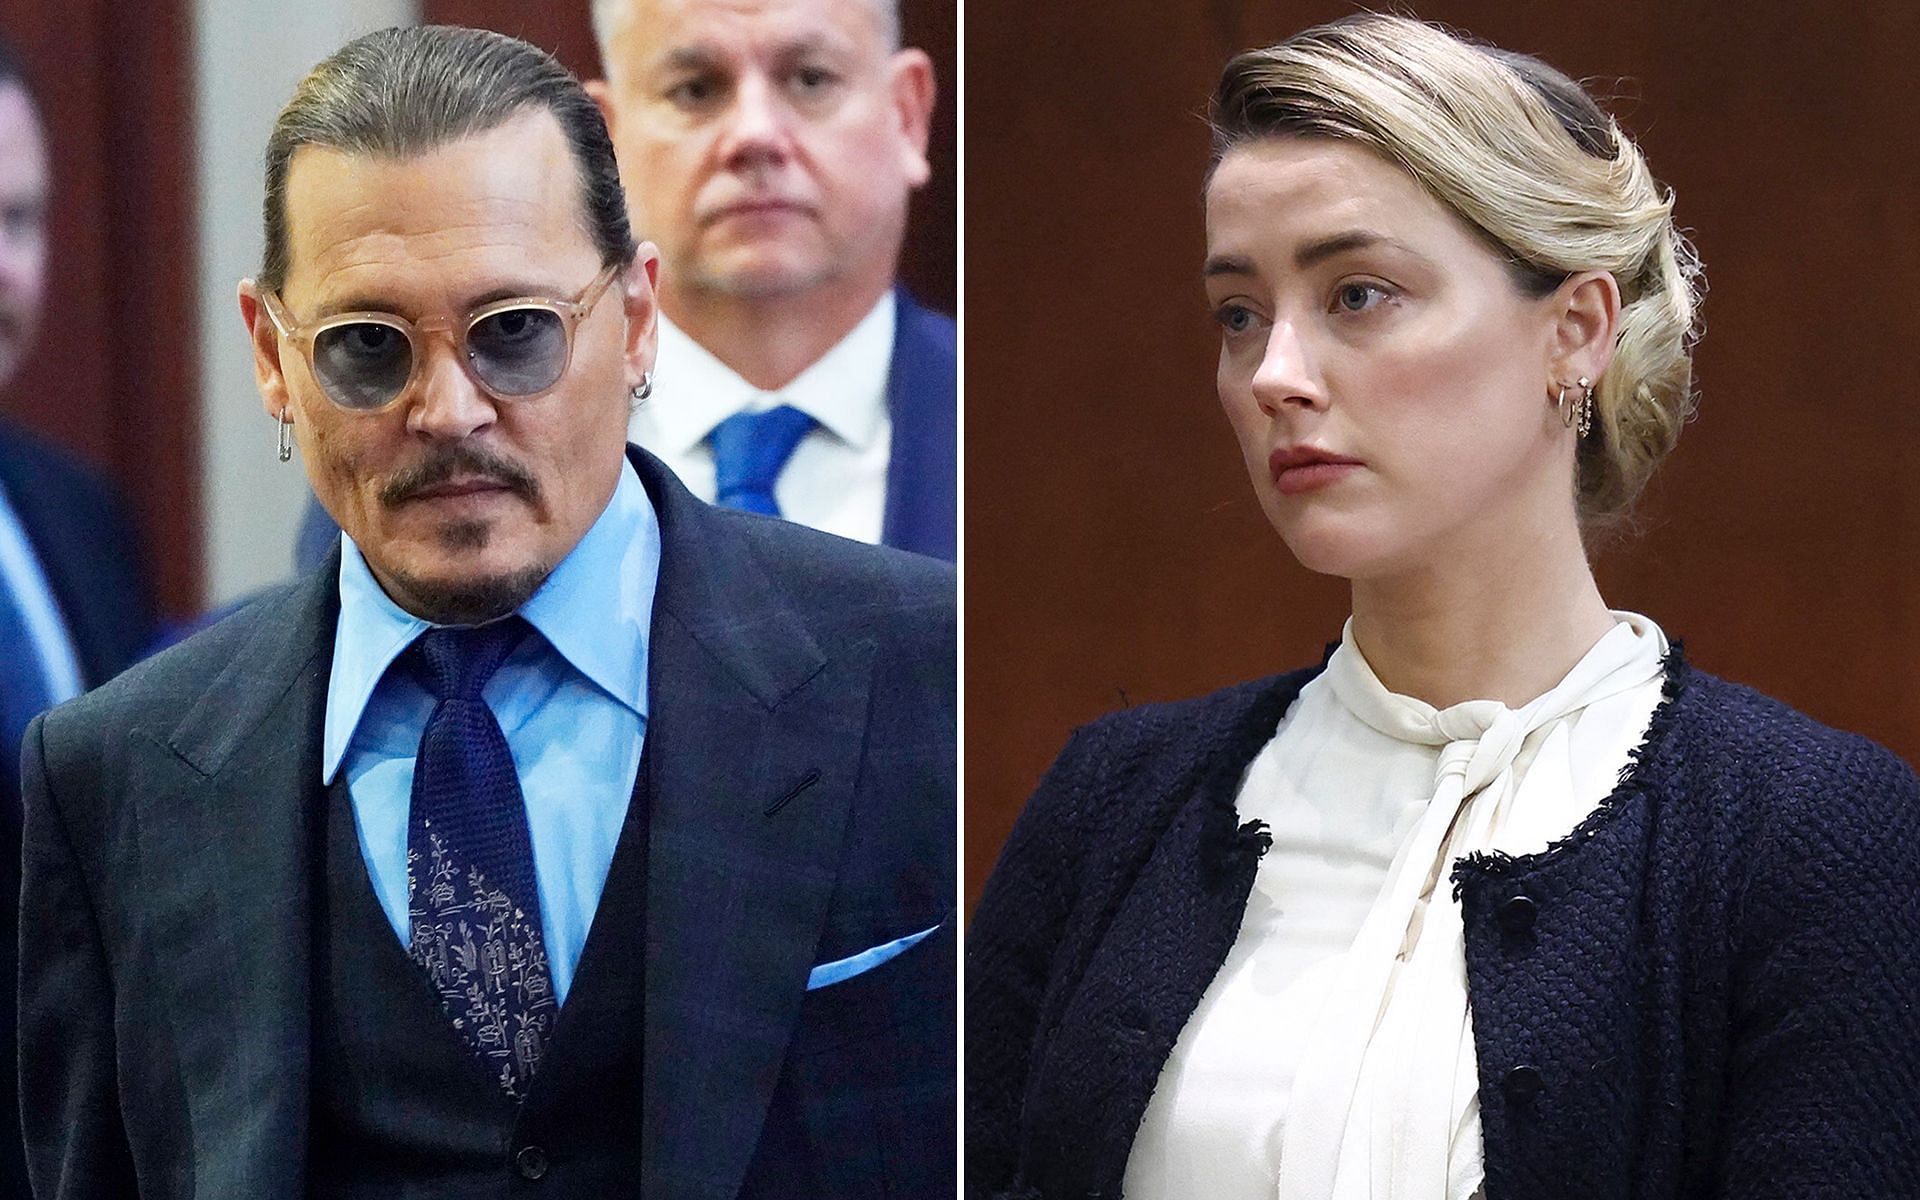 Johnny Depp and Amber Heard (Image via Getty Images)